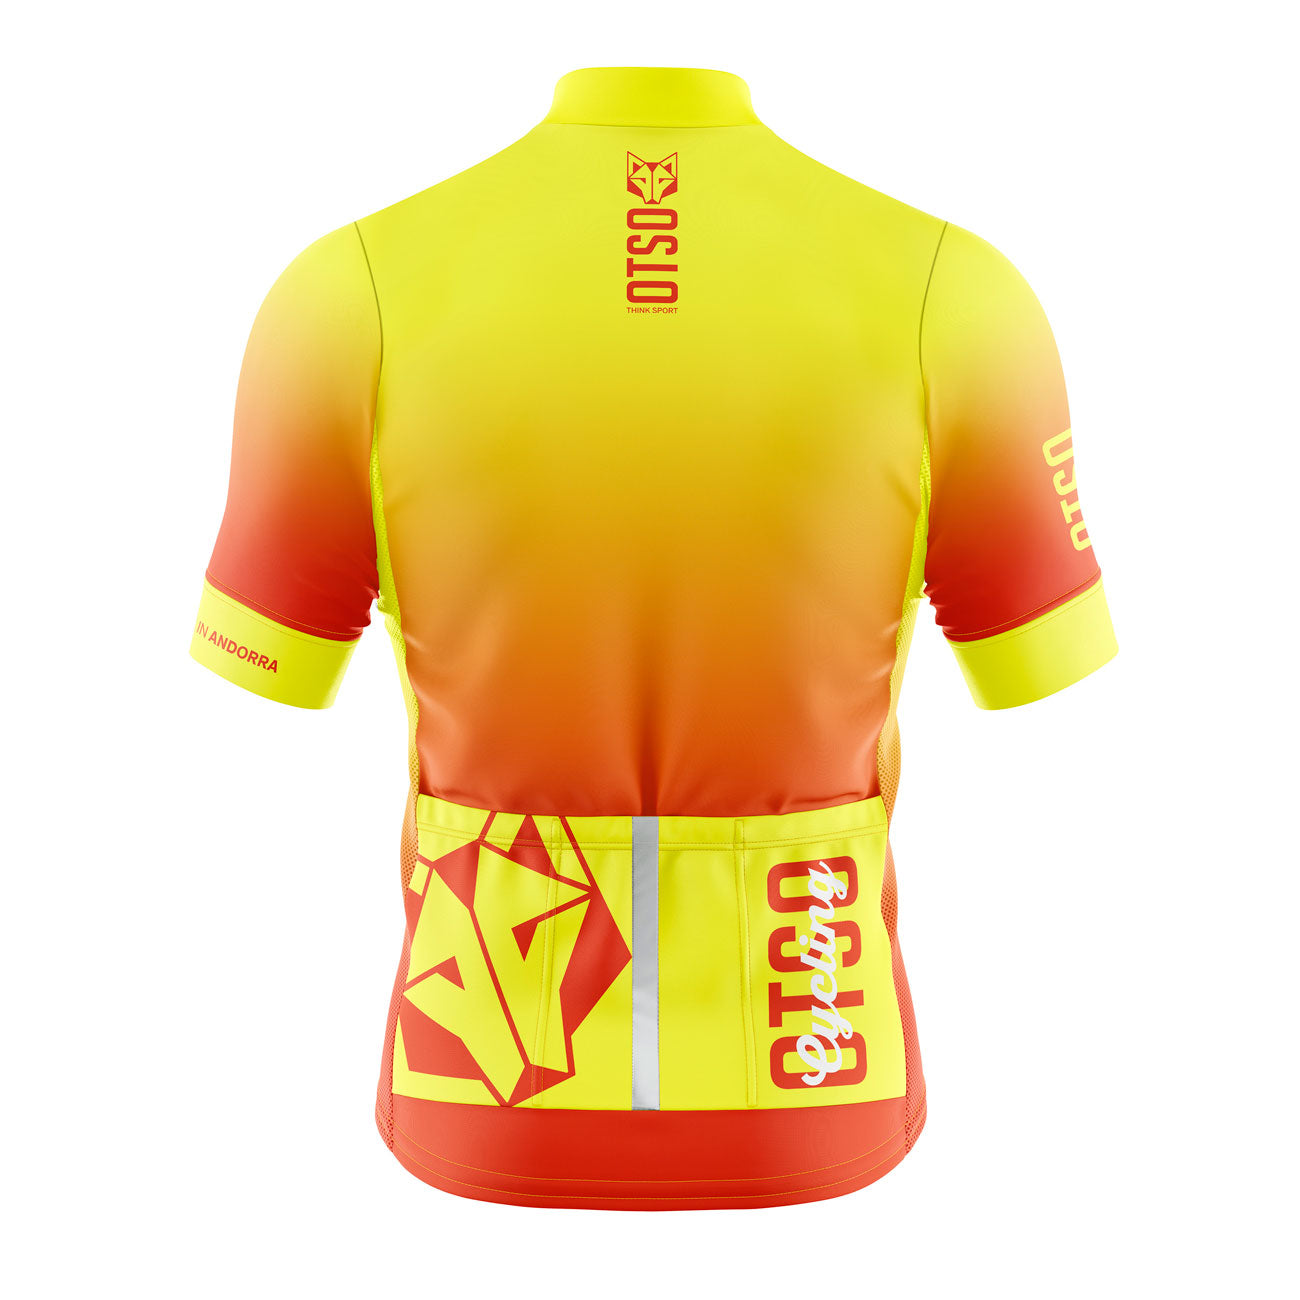 Maillot de ciclismo manga corta mujer - Fluo Orange (Outlet)